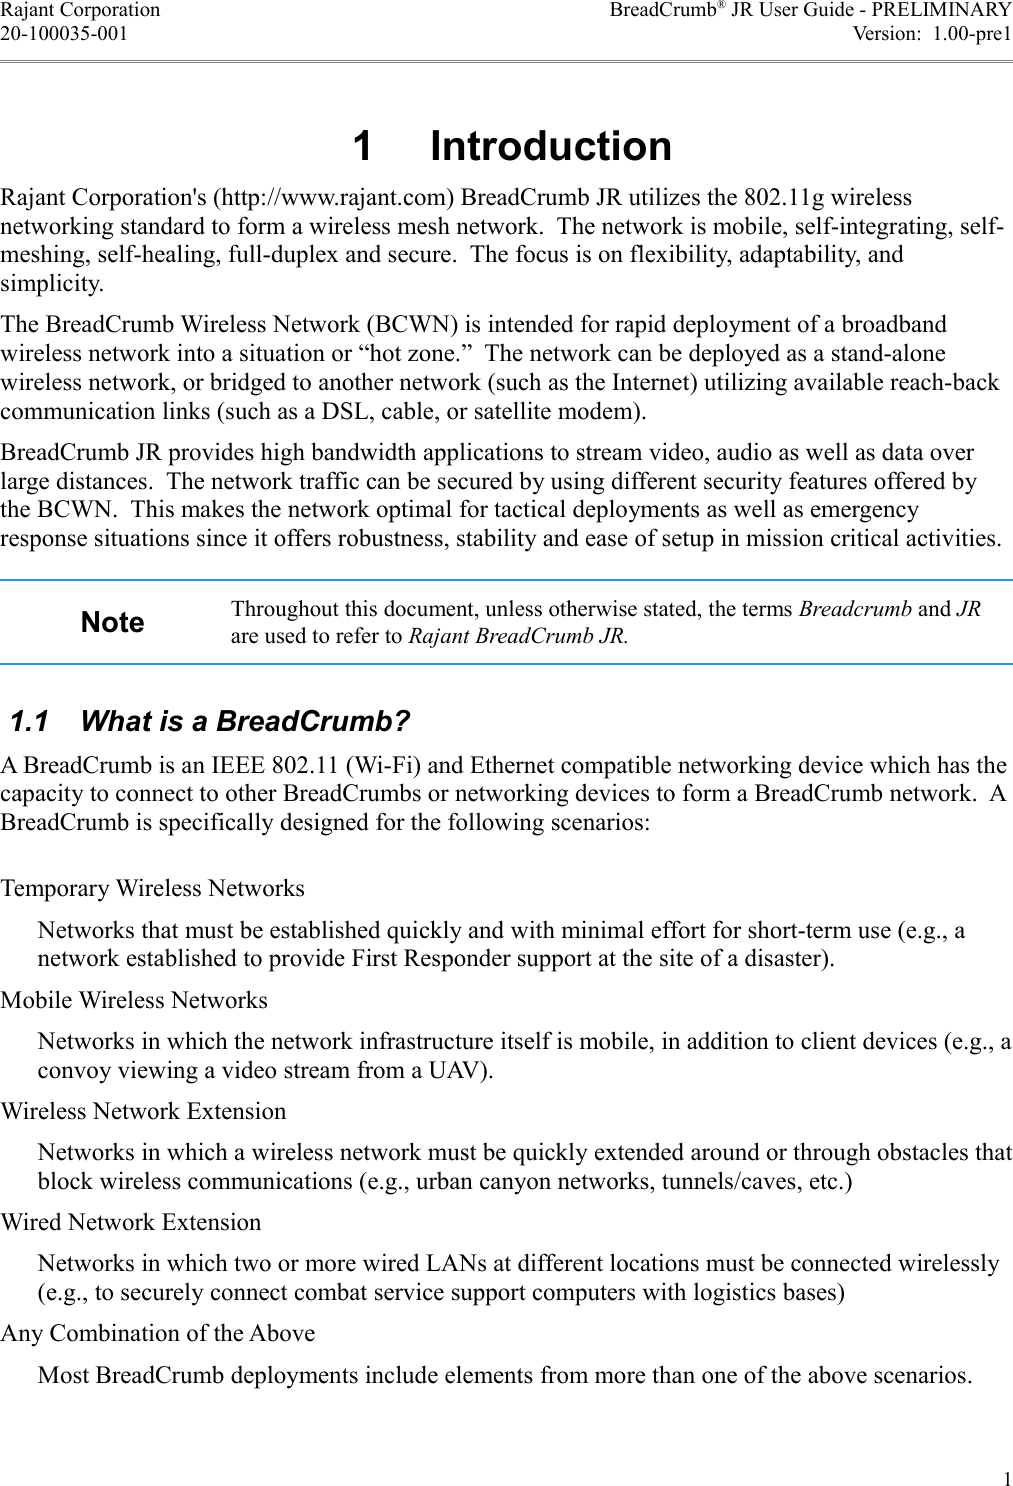 Rajant Corporation BreadCrumb® JR User Guide - PRELIMINARY20-100035-001 Version:  1.00-pre1, )Rajant Corporation&apos;s (http://www.rajant.com) BreadCrumb JR utilizes the 802.11g wireless networking standard to form a wireless mesh network.  The network is mobile, self-integrating, self-meshing, self-healing, full-duplex and secure.  The focus is on flexibility, adaptability, and simplicity.The BreadCrumb Wireless Network (BCWN) is intended for rapid deployment of a broadband wireless network into a situation or “hot zone.”  The network can be deployed as a stand-alone wireless network, or bridged to another network (such as the Internet) utilizing available reach-back communication links (such as a DSL, cable, or satellite modem).BreadCrumb JR provides high bandwidth applications to stream video, audio as well as data over large distances.  The network traffic can be secured by using different security features offered by the BCWN.  This makes the network optimal for tactical deployments as well as emergency response situations since it offers robustness, stability and ease of setup in mission critical activities. Throughout this document, unless otherwise stated, the terms Breadcrumb and JR are used to refer to Rajant BreadCrumb JR. 1.1  What is a BreadCrumb?A BreadCrumb is an IEEE 802.11 (Wi-Fi) and Ethernet compatible networking device which has the capacity to connect to other BreadCrumbs or networking devices to form a BreadCrumb network.  A BreadCrumb is specifically designed for the following scenarios:Temporary Wireless NetworksNetworks that must be established quickly and with minimal effort for short-term use (e.g., a network established to provide First Responder support at the site of a disaster).Mobile Wireless NetworksNetworks in which the network infrastructure itself is mobile, in addition to client devices (e.g., a convoy viewing a video stream from a UAV).Wireless Network ExtensionNetworks in which a wireless network must be quickly extended around or through obstacles that block wireless communications (e.g., urban canyon networks, tunnels/caves, etc.)Wired Network ExtensionNetworks in which two or more wired LANs at different locations must be connected wirelessly (e.g., to securely connect combat service support computers with logistics bases)Any Combination of the AboveMost BreadCrumb deployments include elements from more than one of the above scenarios.1